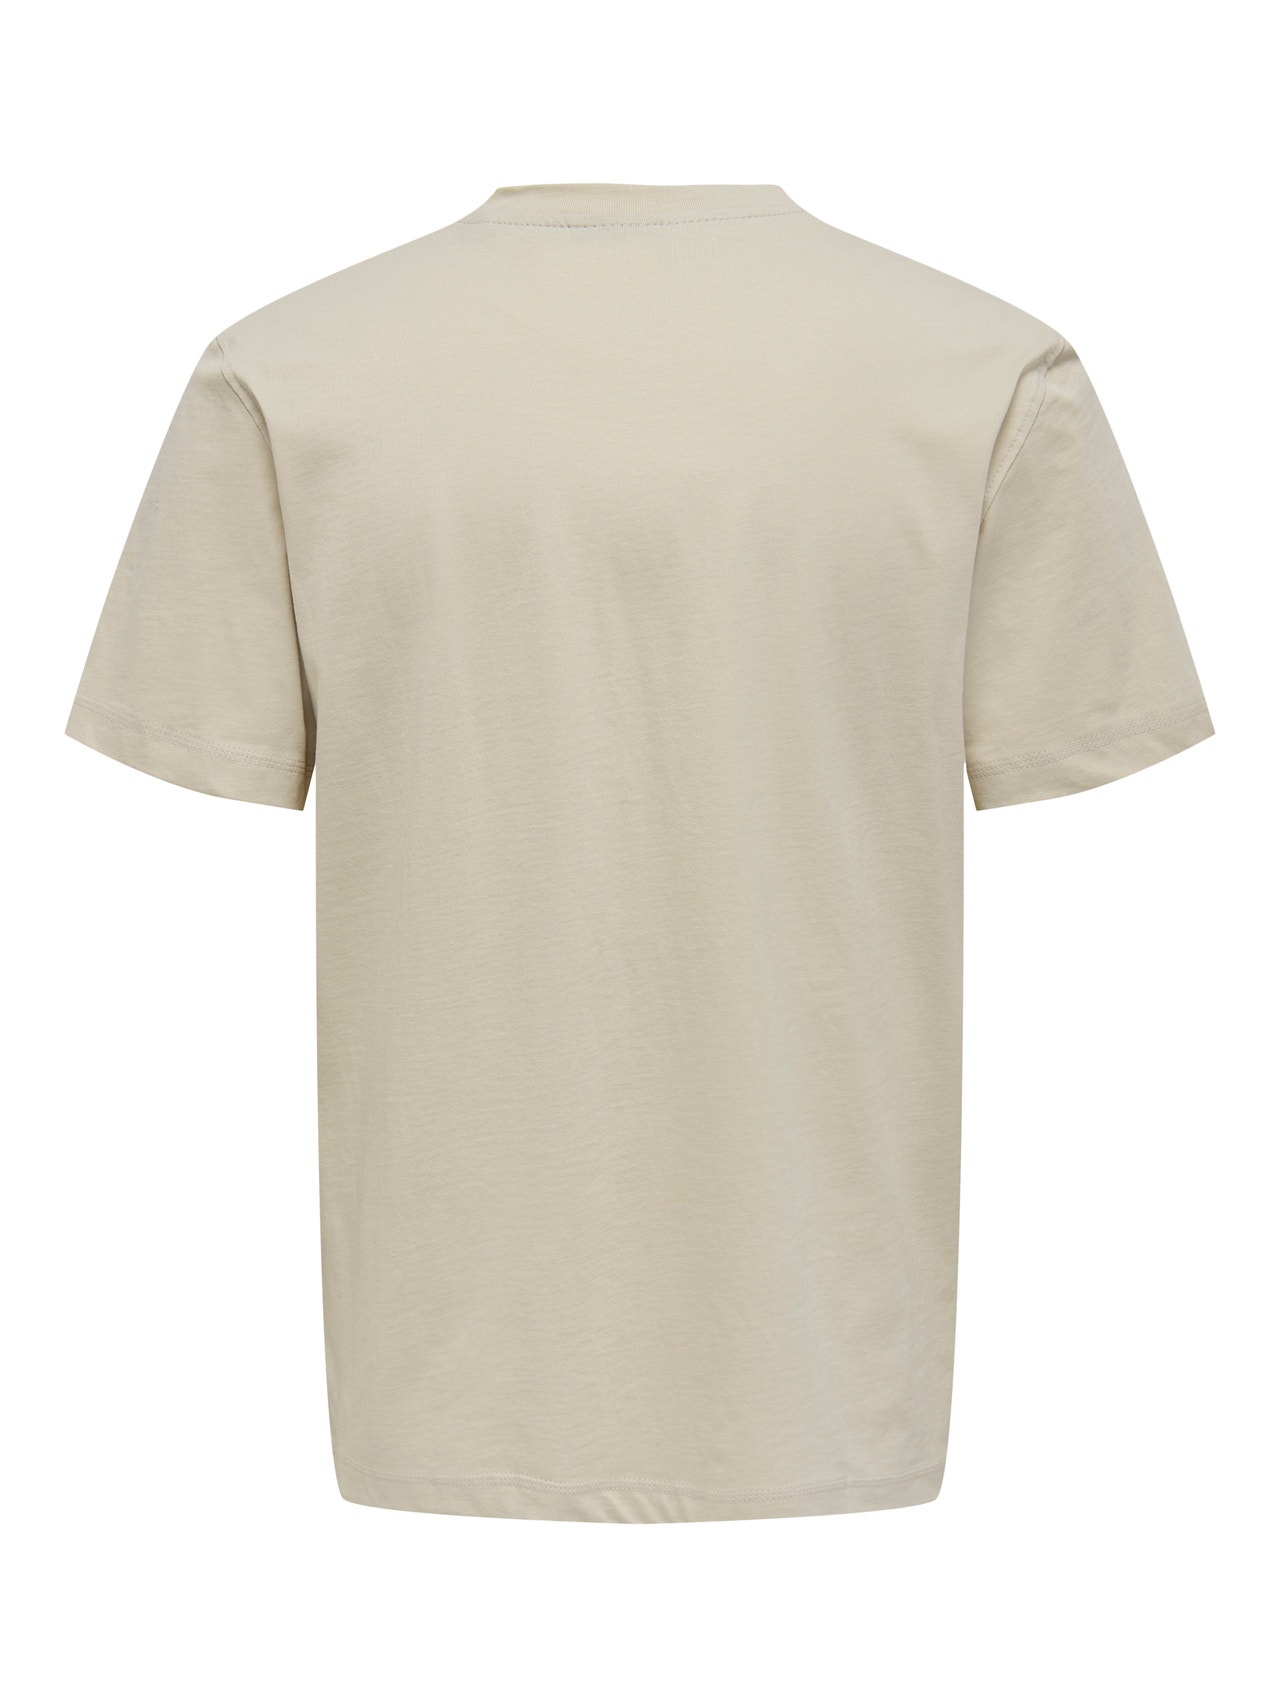 ONLY & SONS O-neck t-shirt -Pelican - 22025208